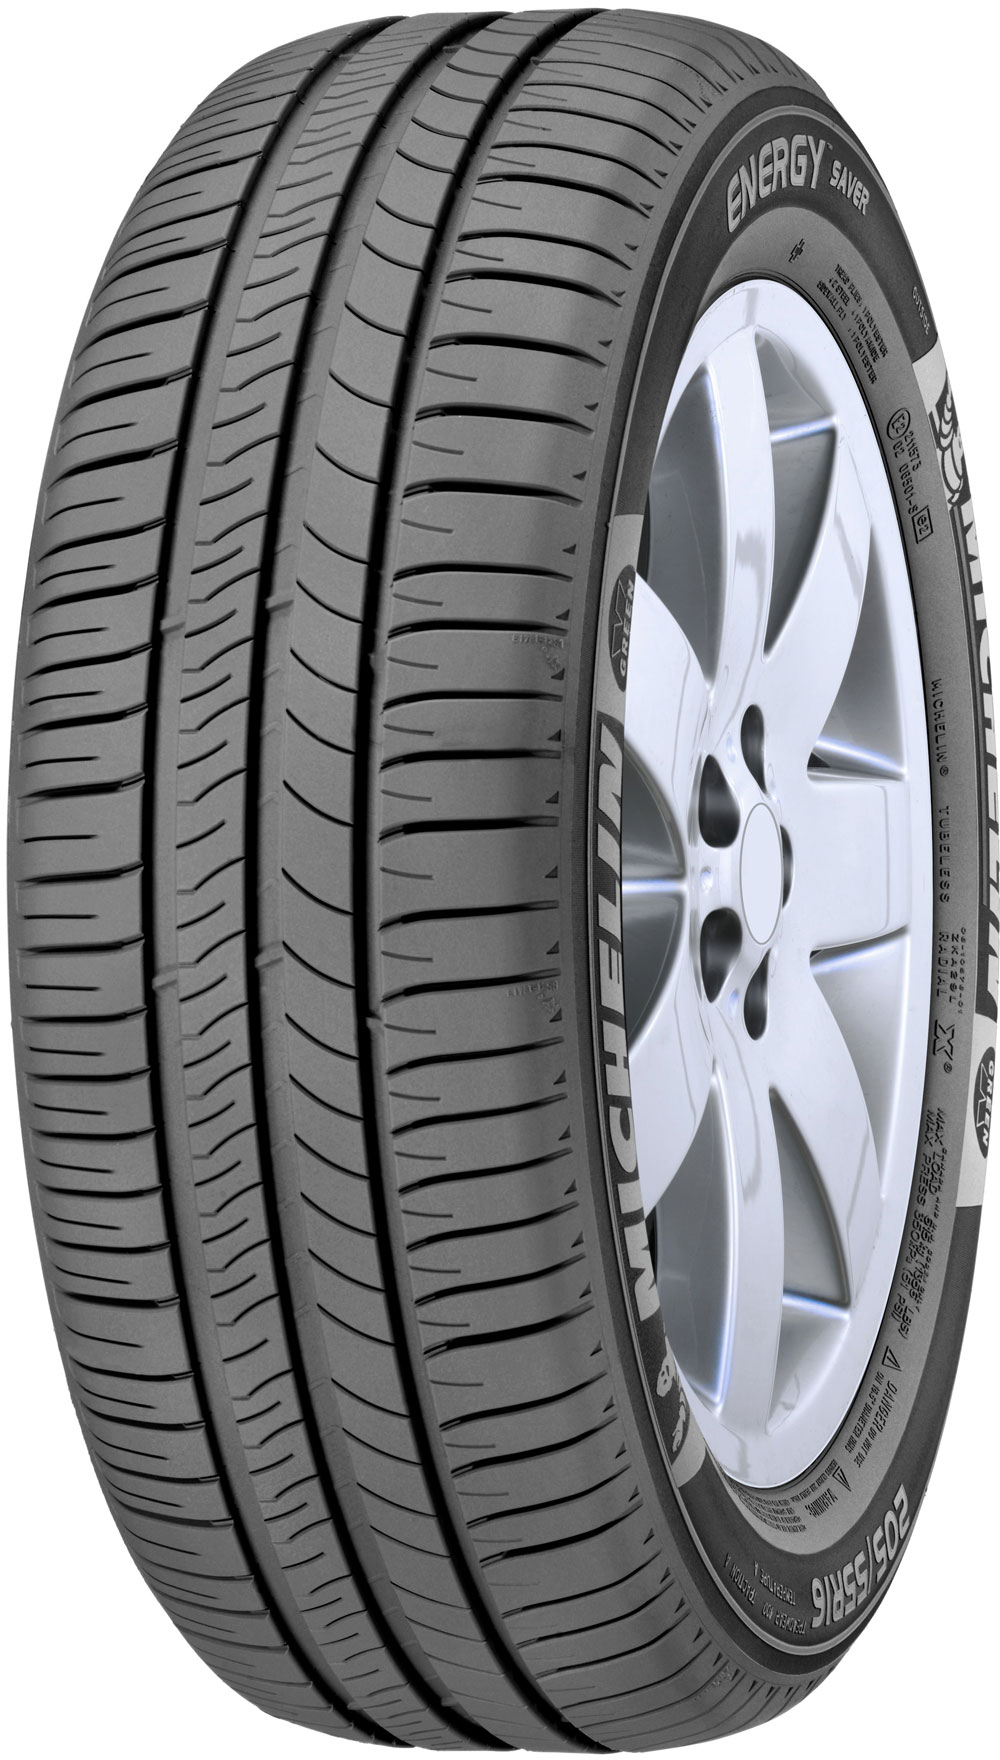 Anvelope auto MICHELIN ENERGY SAVER+ BMW 175/65 R14 82T